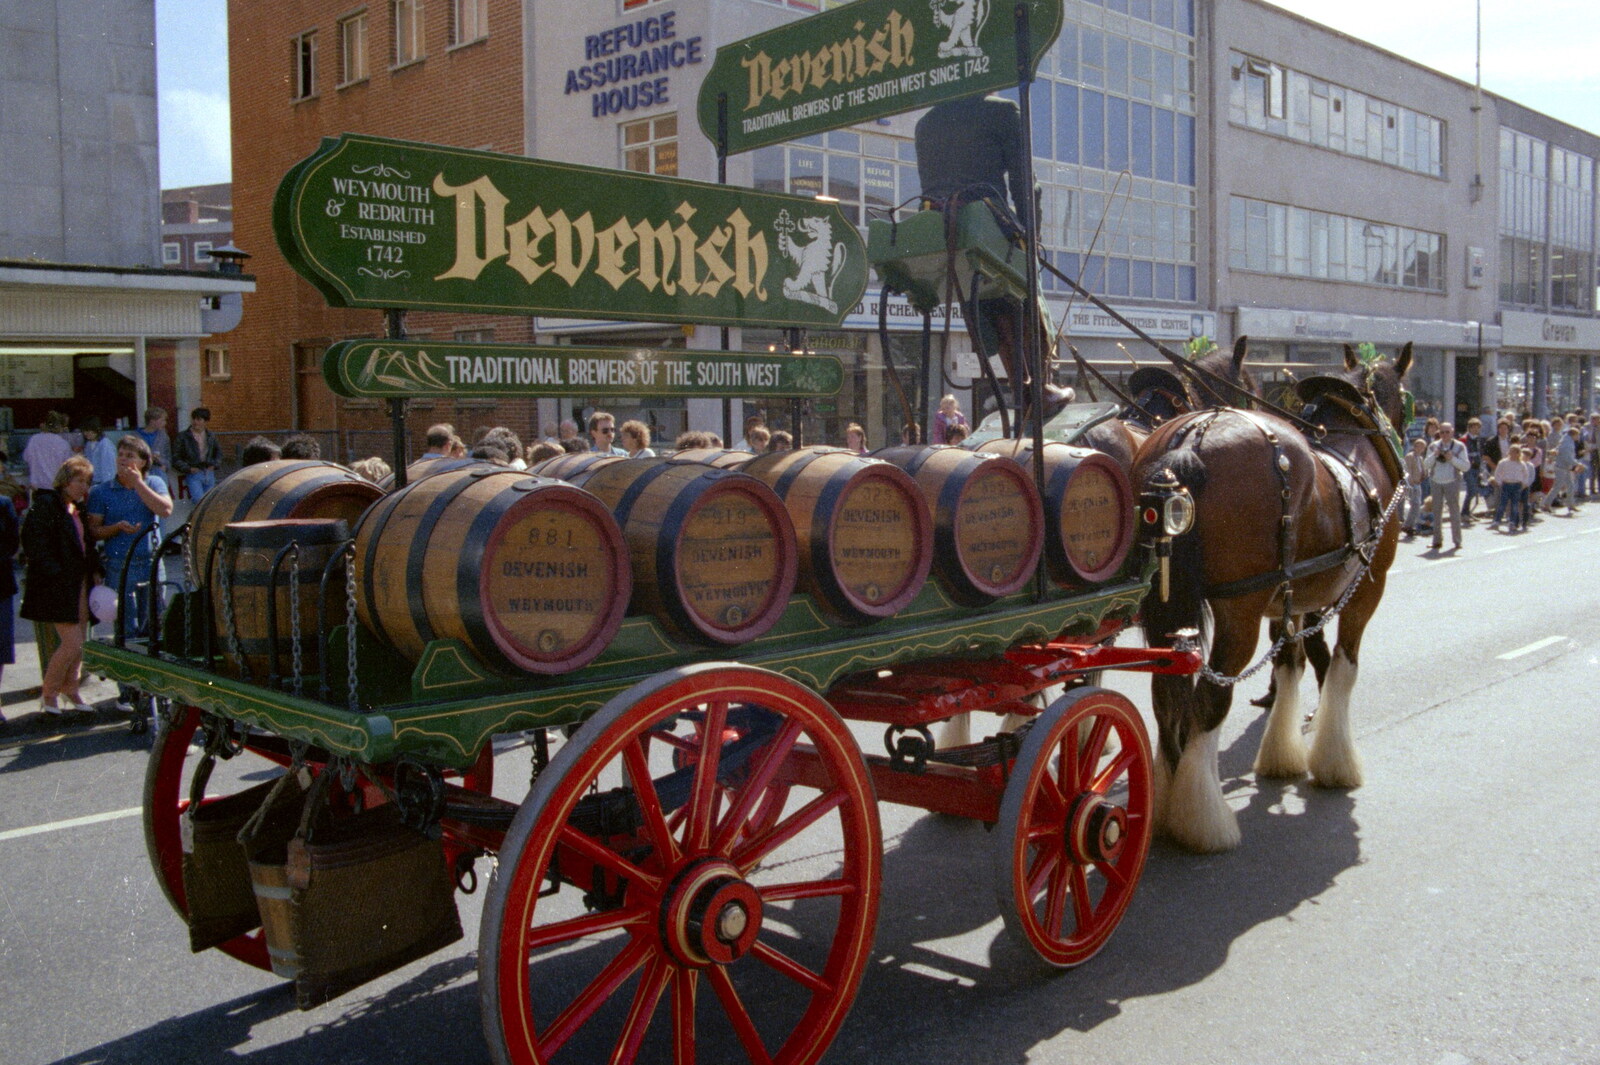 The Devenish Brewery dray from Uni: The Lord Mayor's Procession, Plymouth, Devon - 21st May 1986